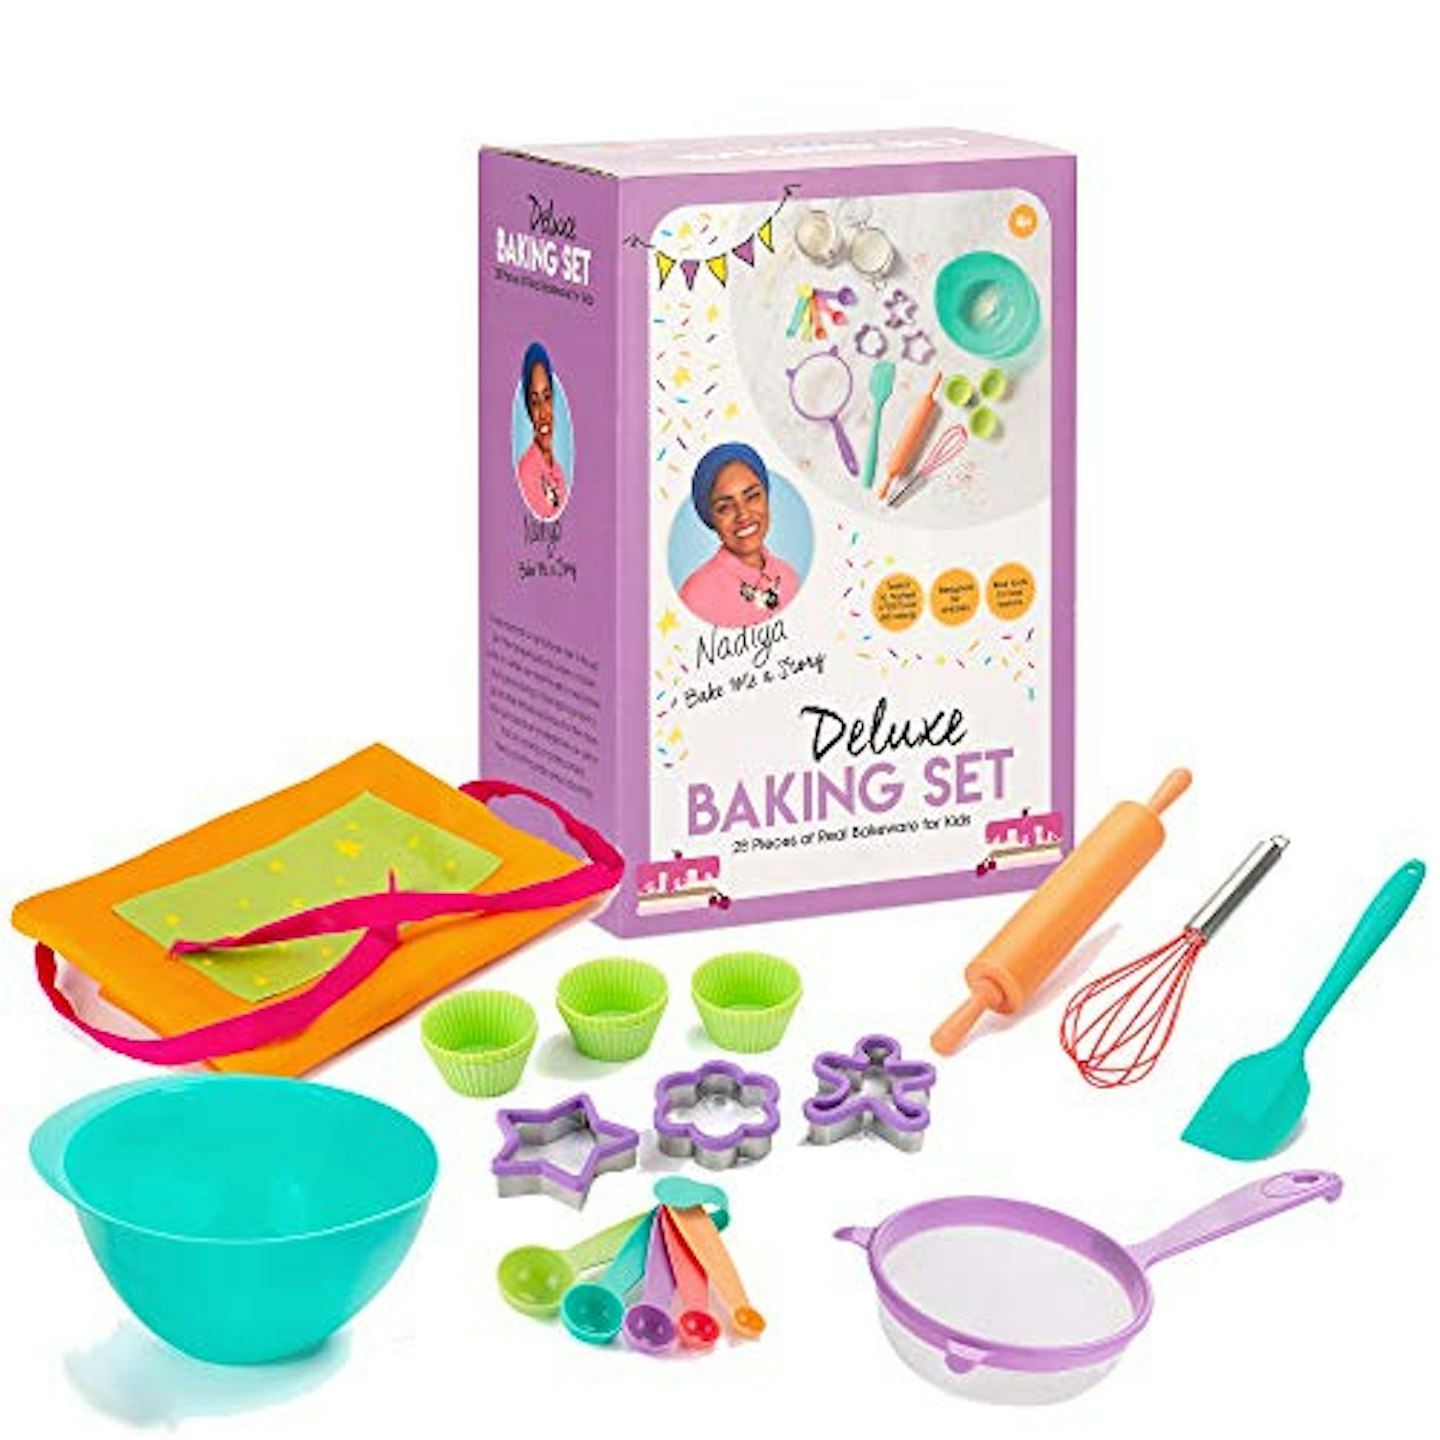 10 of the best kids' baking sets for 2022 UK